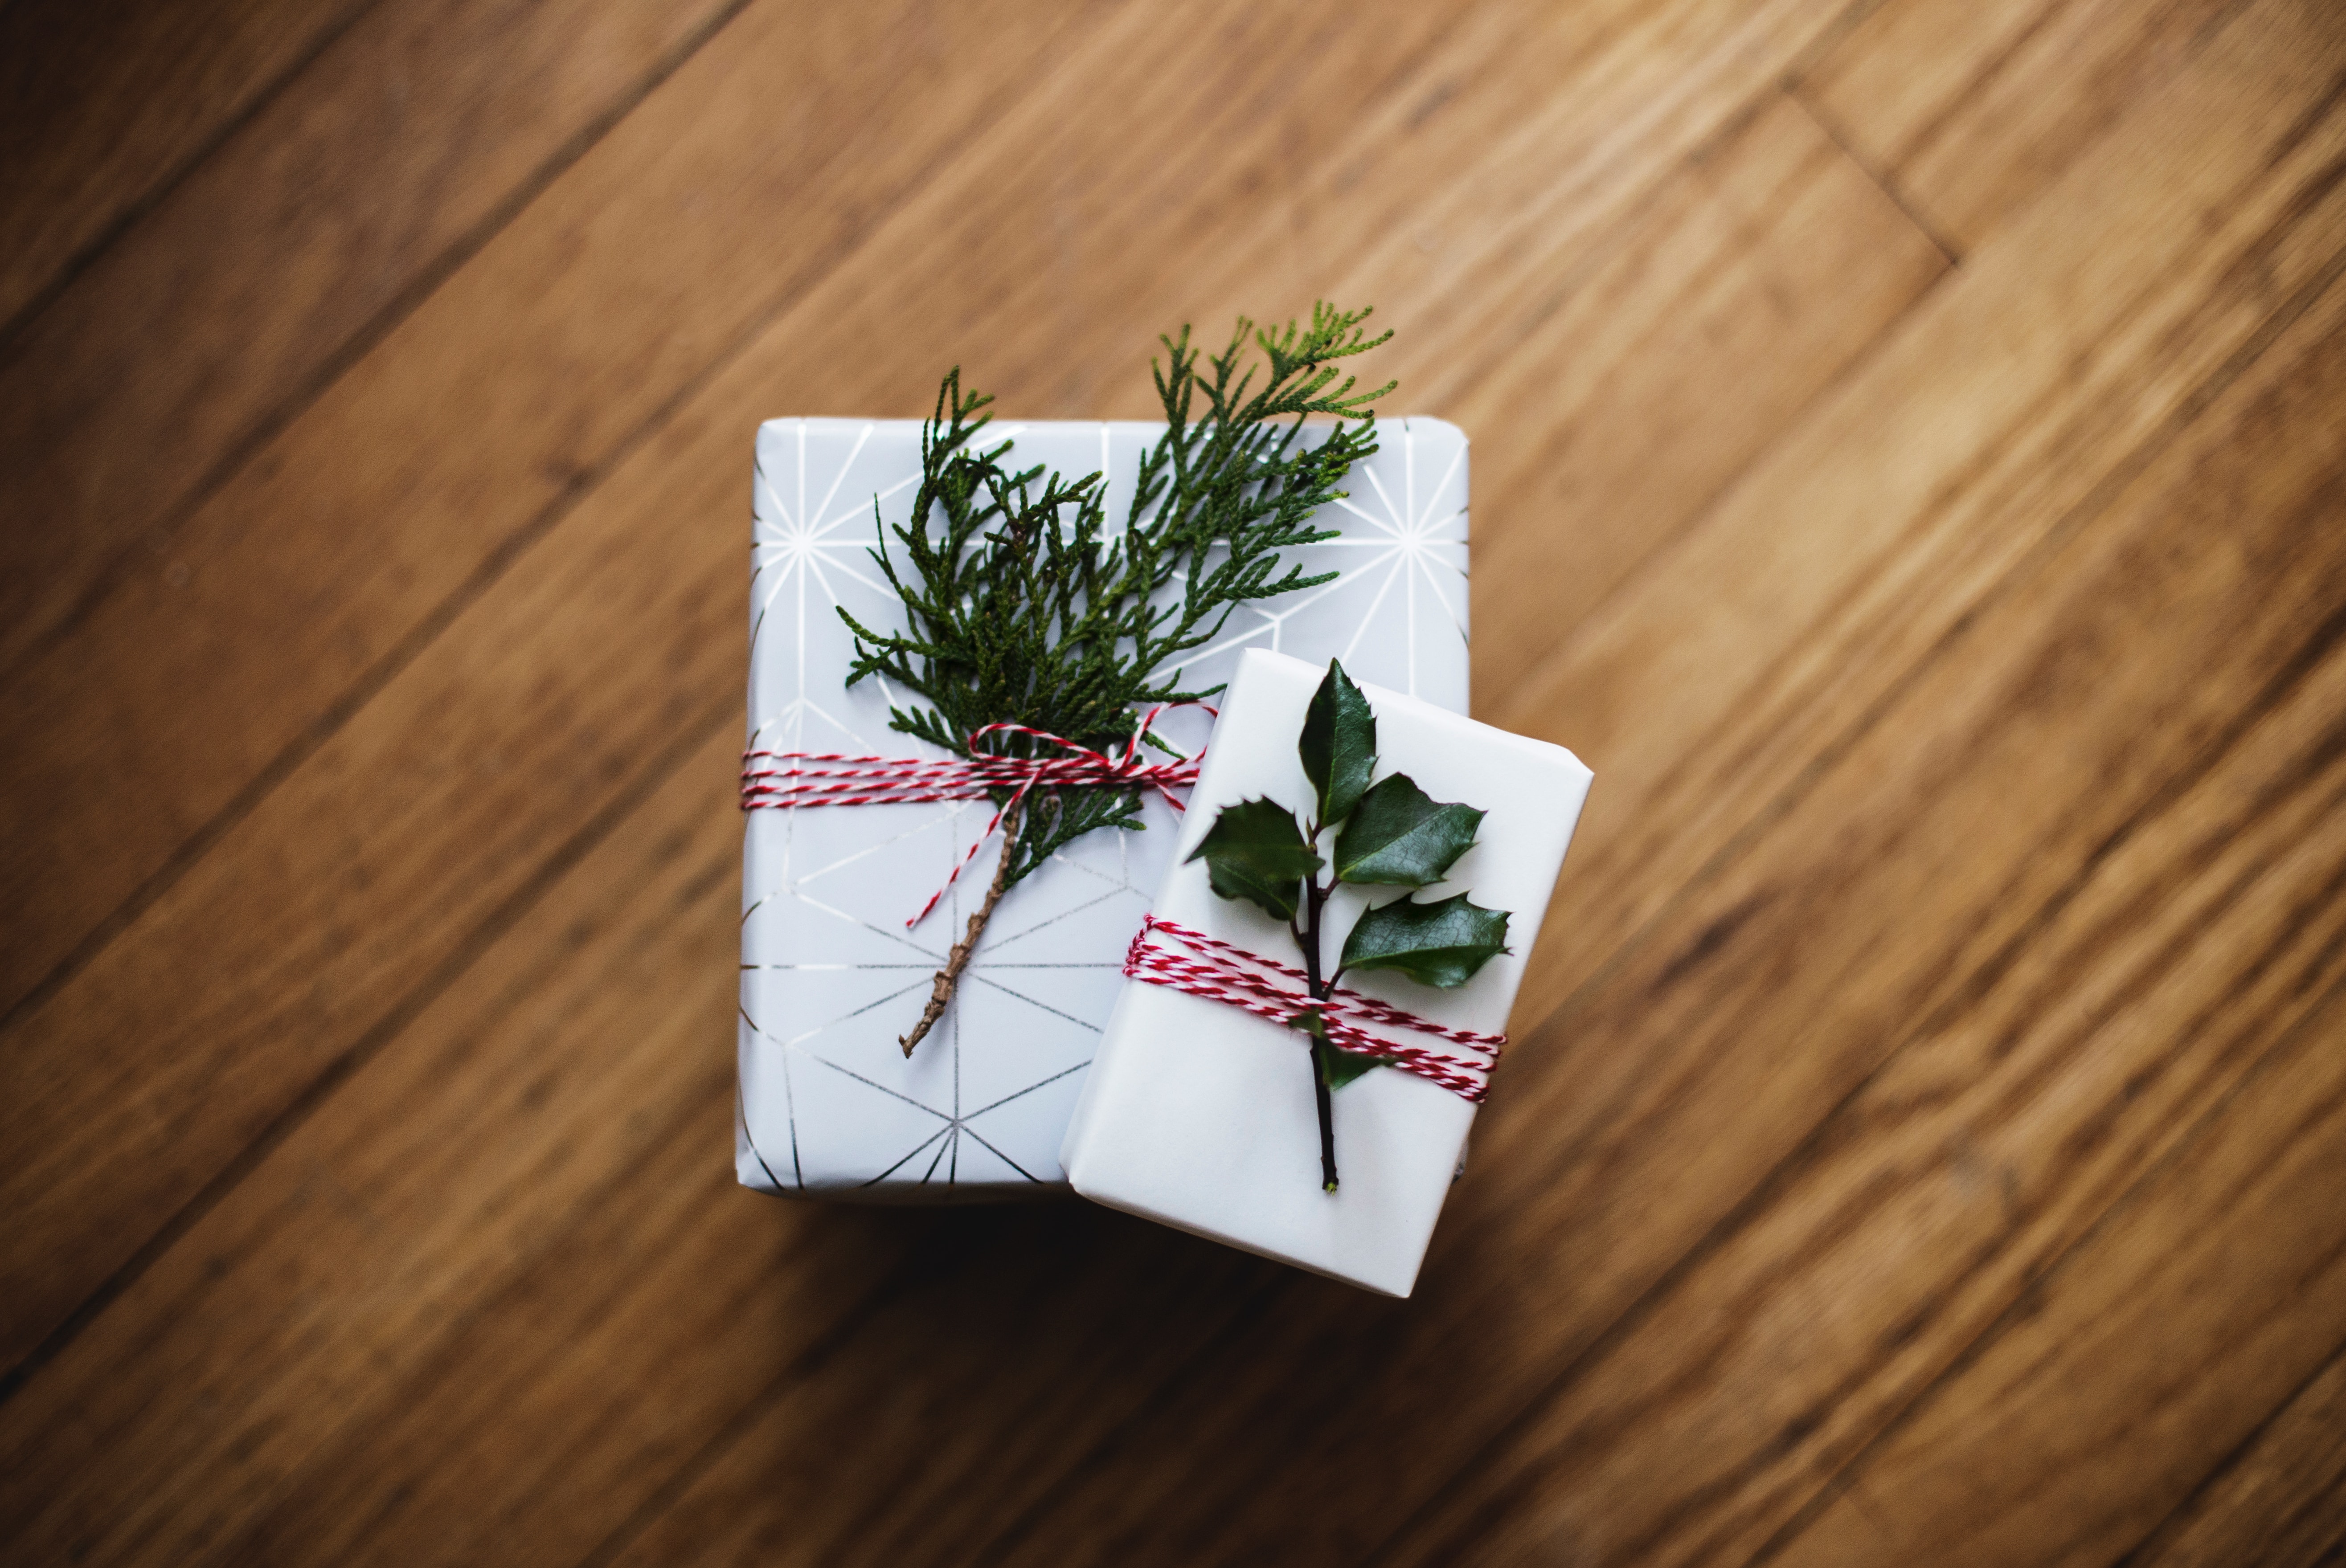 Gift Guide For People With Chronic Illnesses